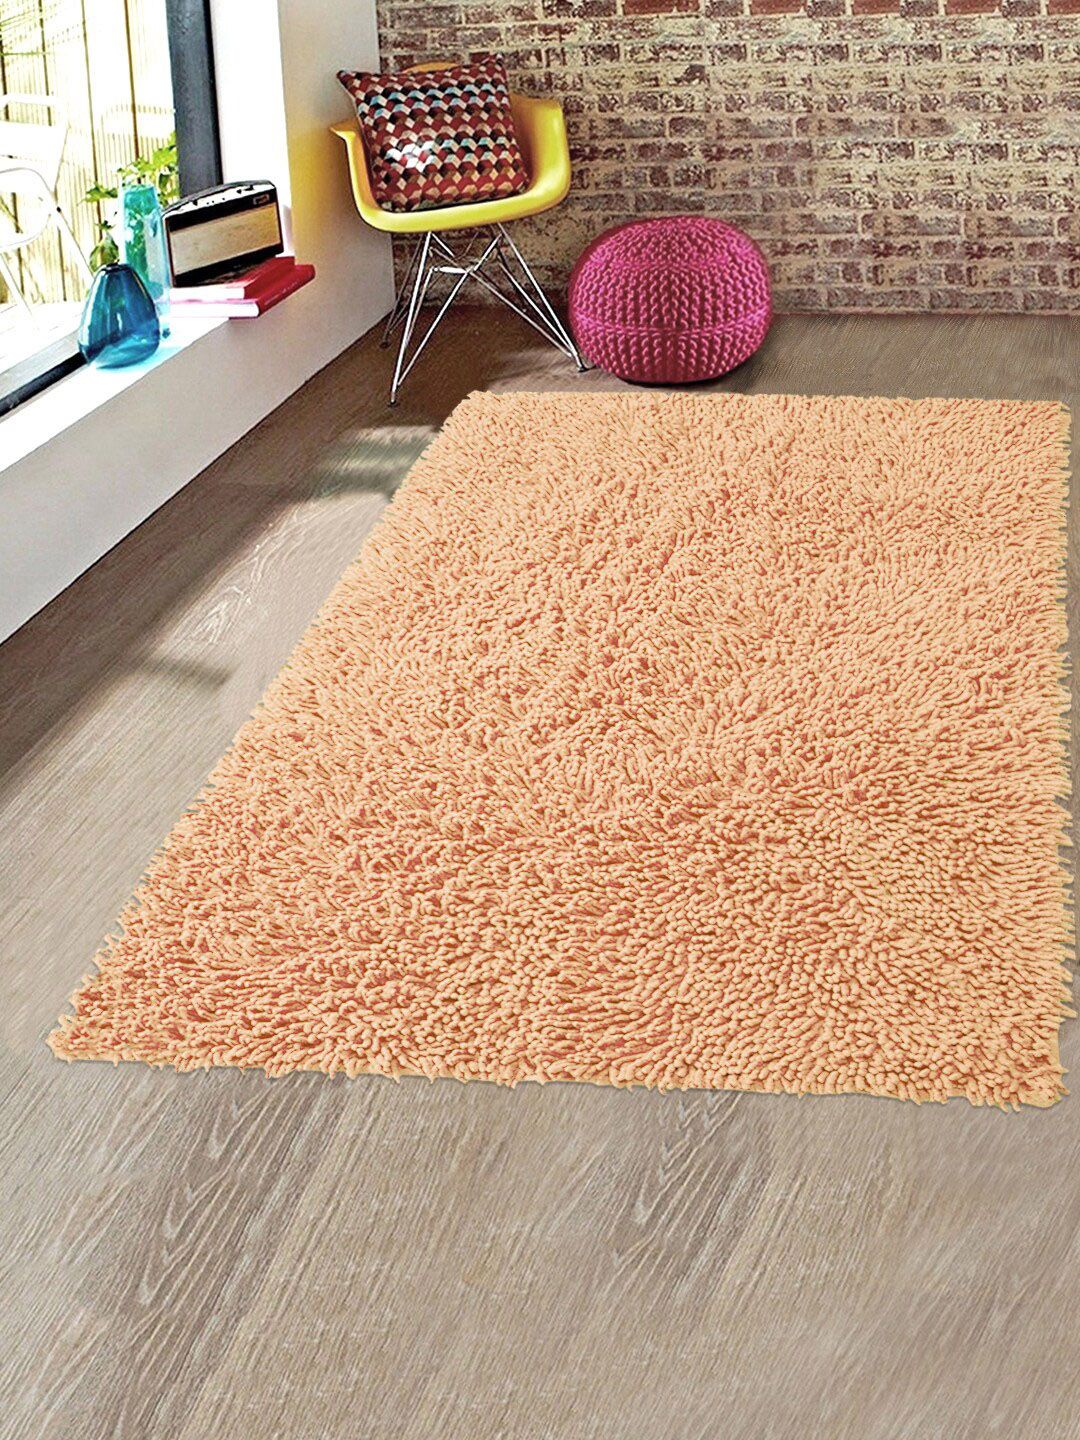 Saral Home Beige Solid Shaggy Anti-Skid Carpet Price in India